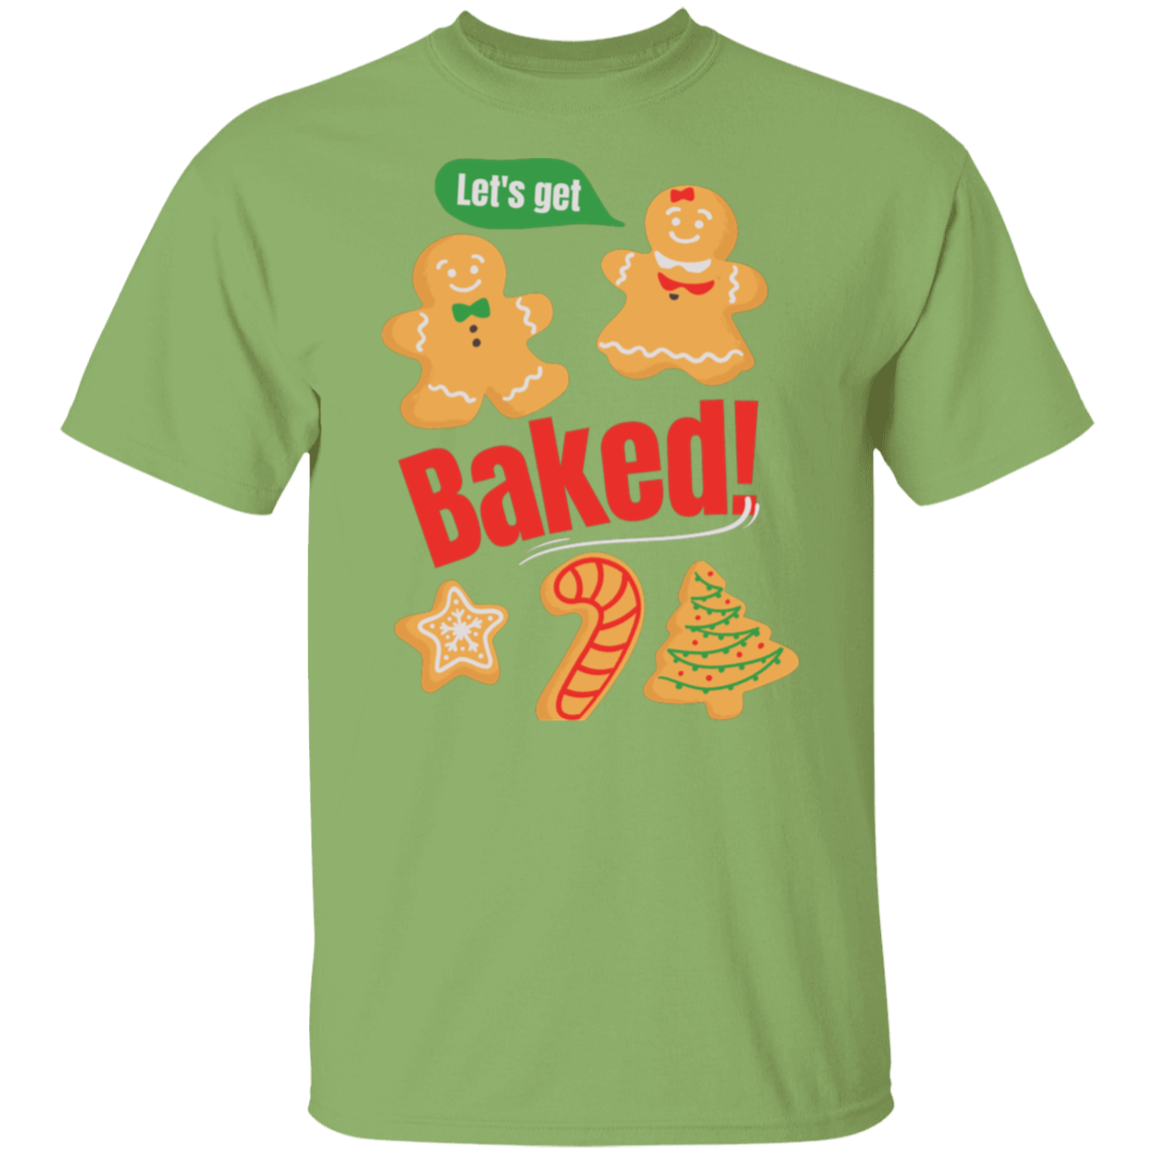 Let's get baked! T-Shirt